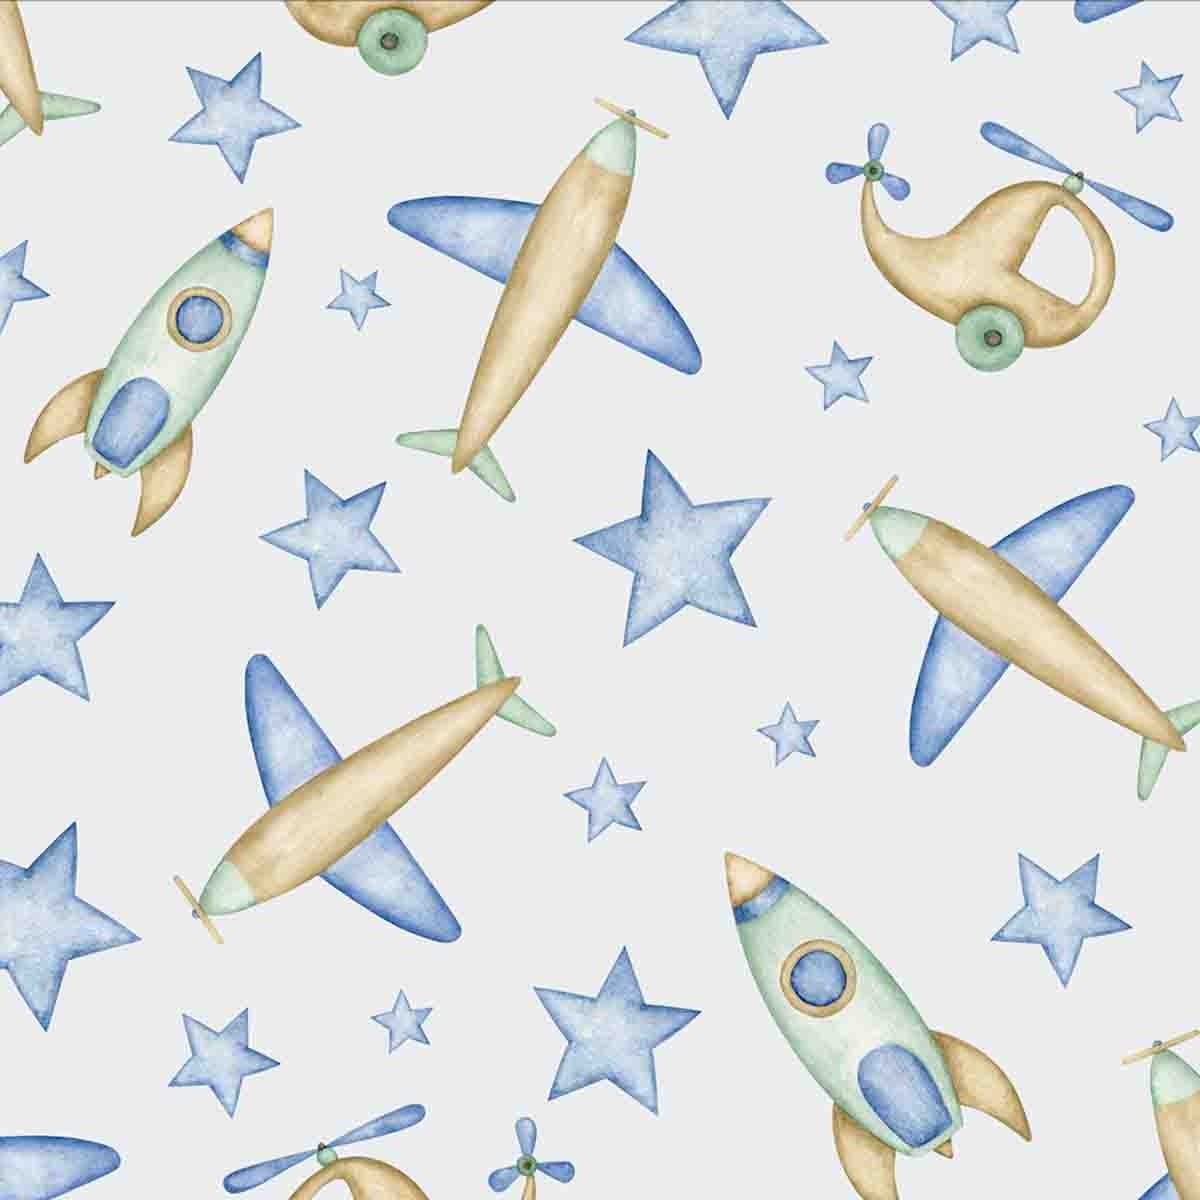 Air Transport Baby Boy Watercolor Seamless Pattern. Hand Drawn Wooden Toys Wallpaper Nursery Mural